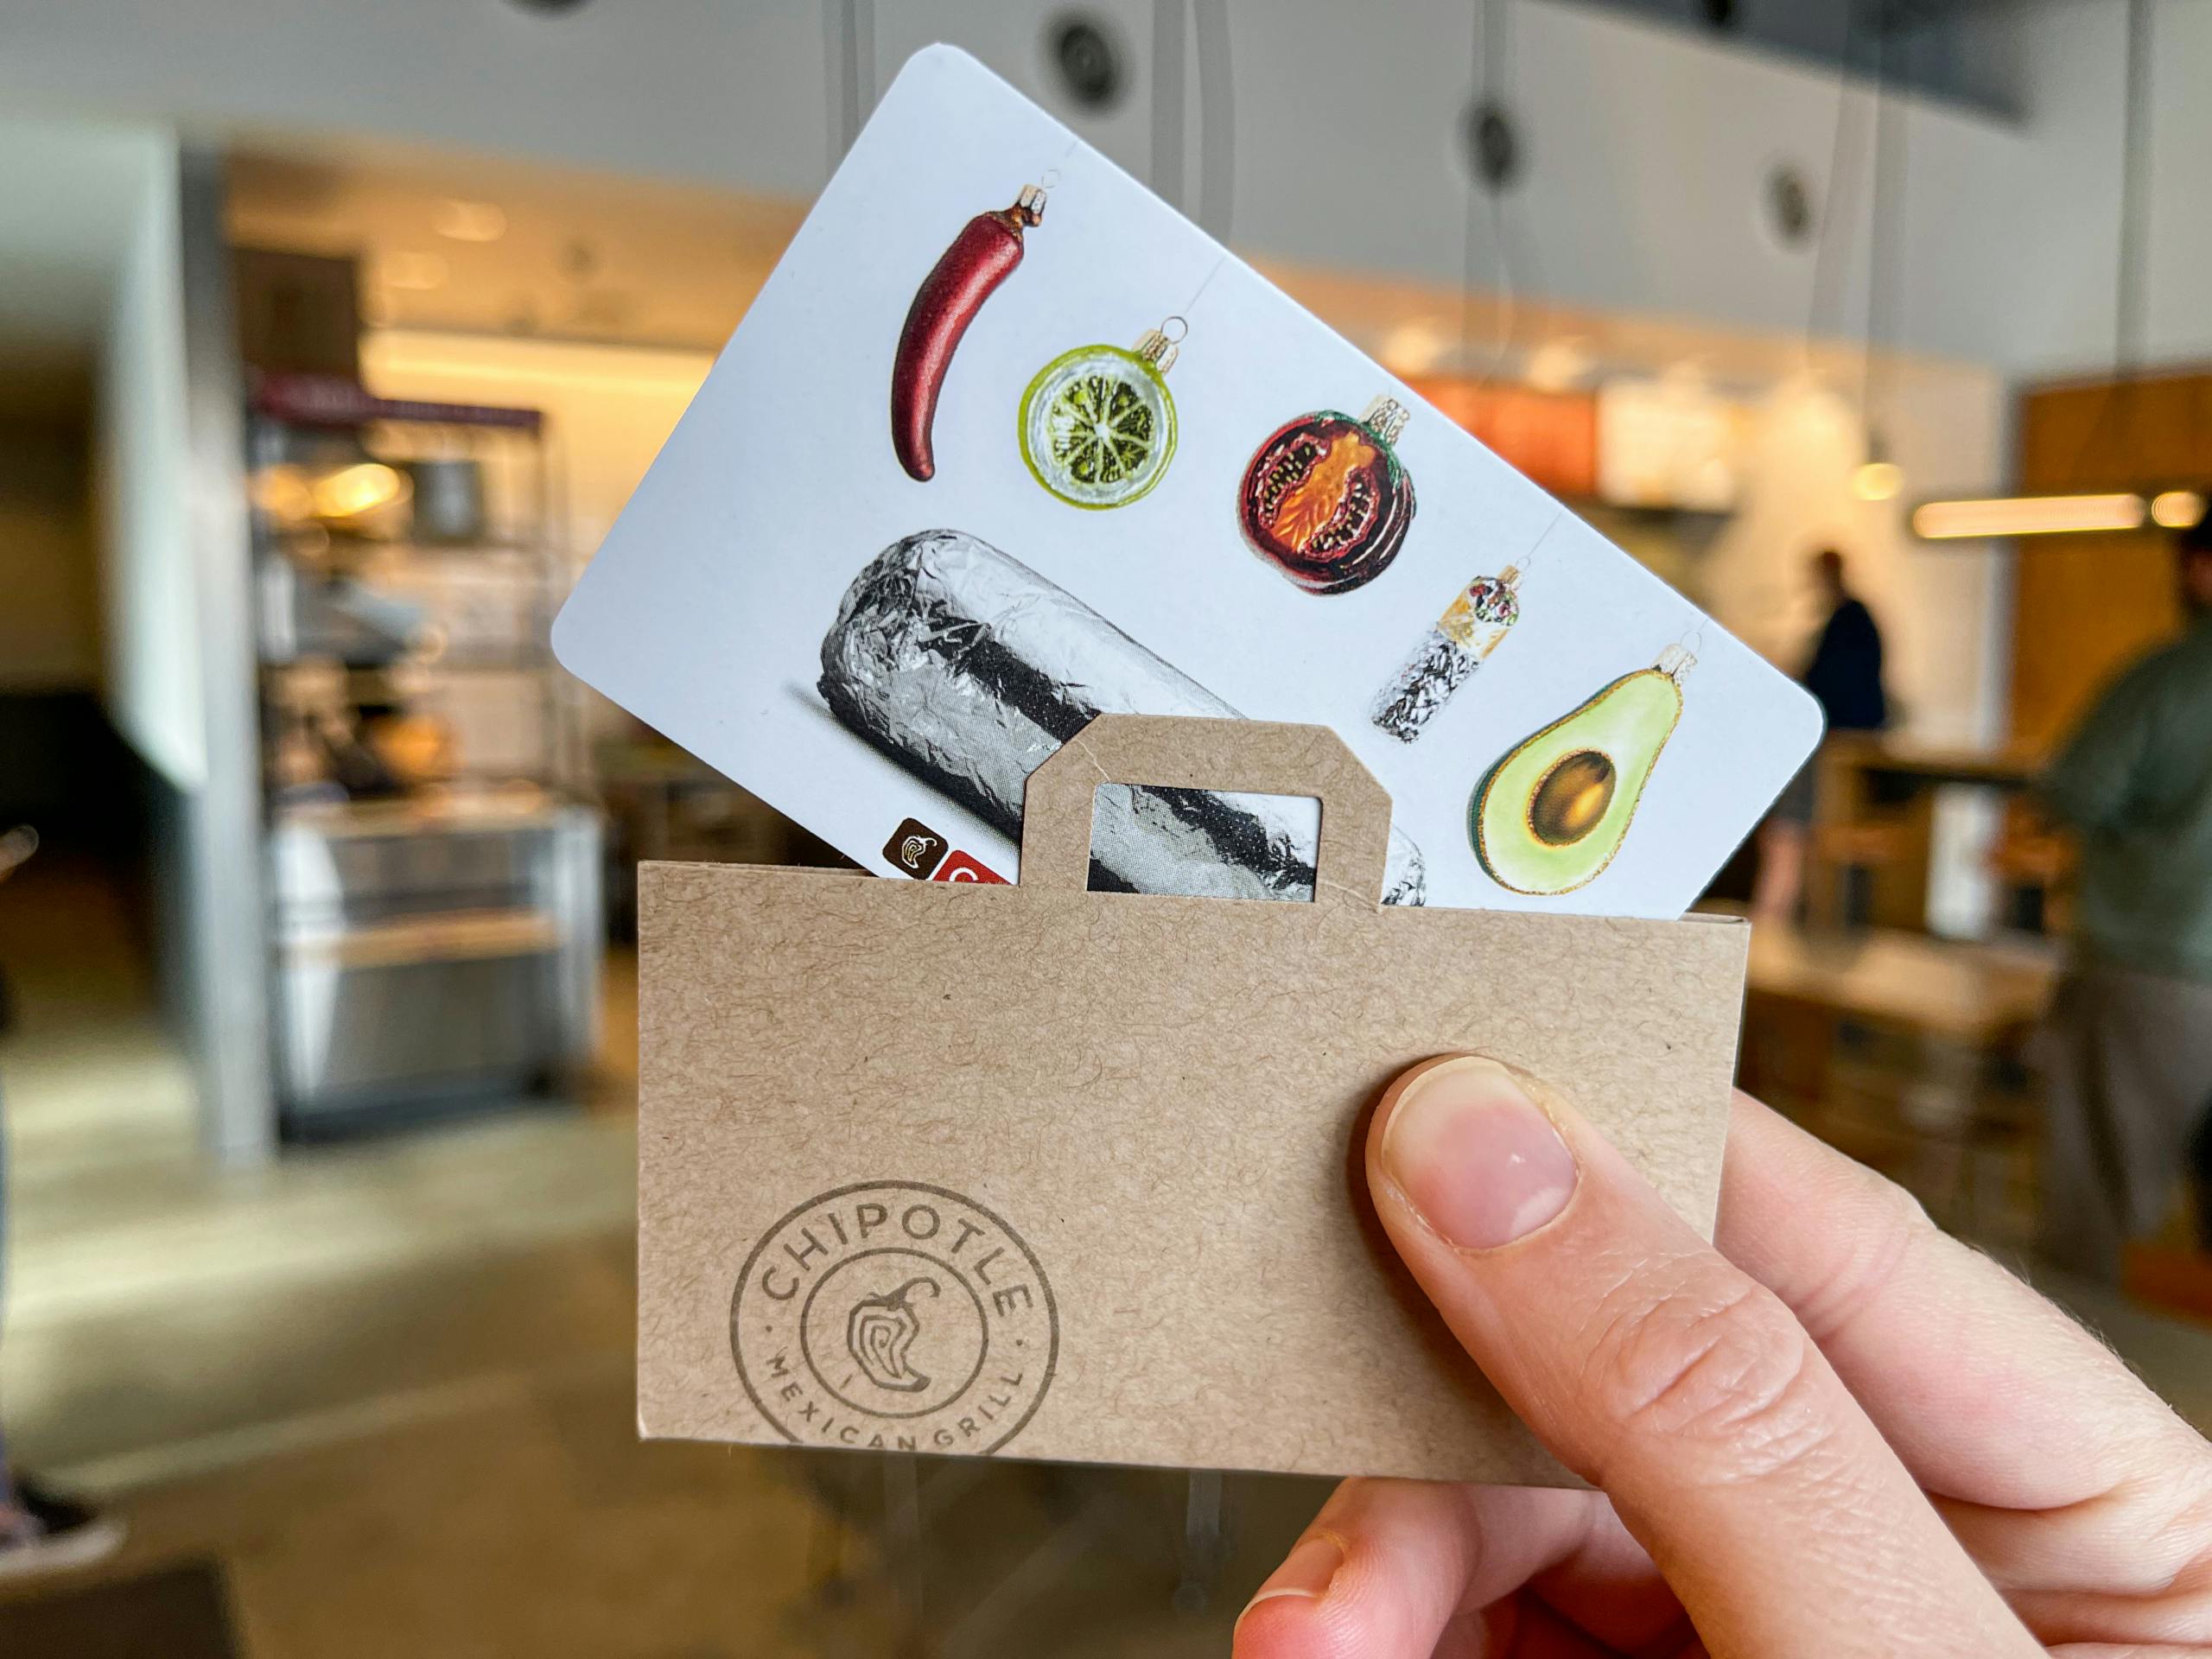 How To Check Your Chipotle Gift Card Balance